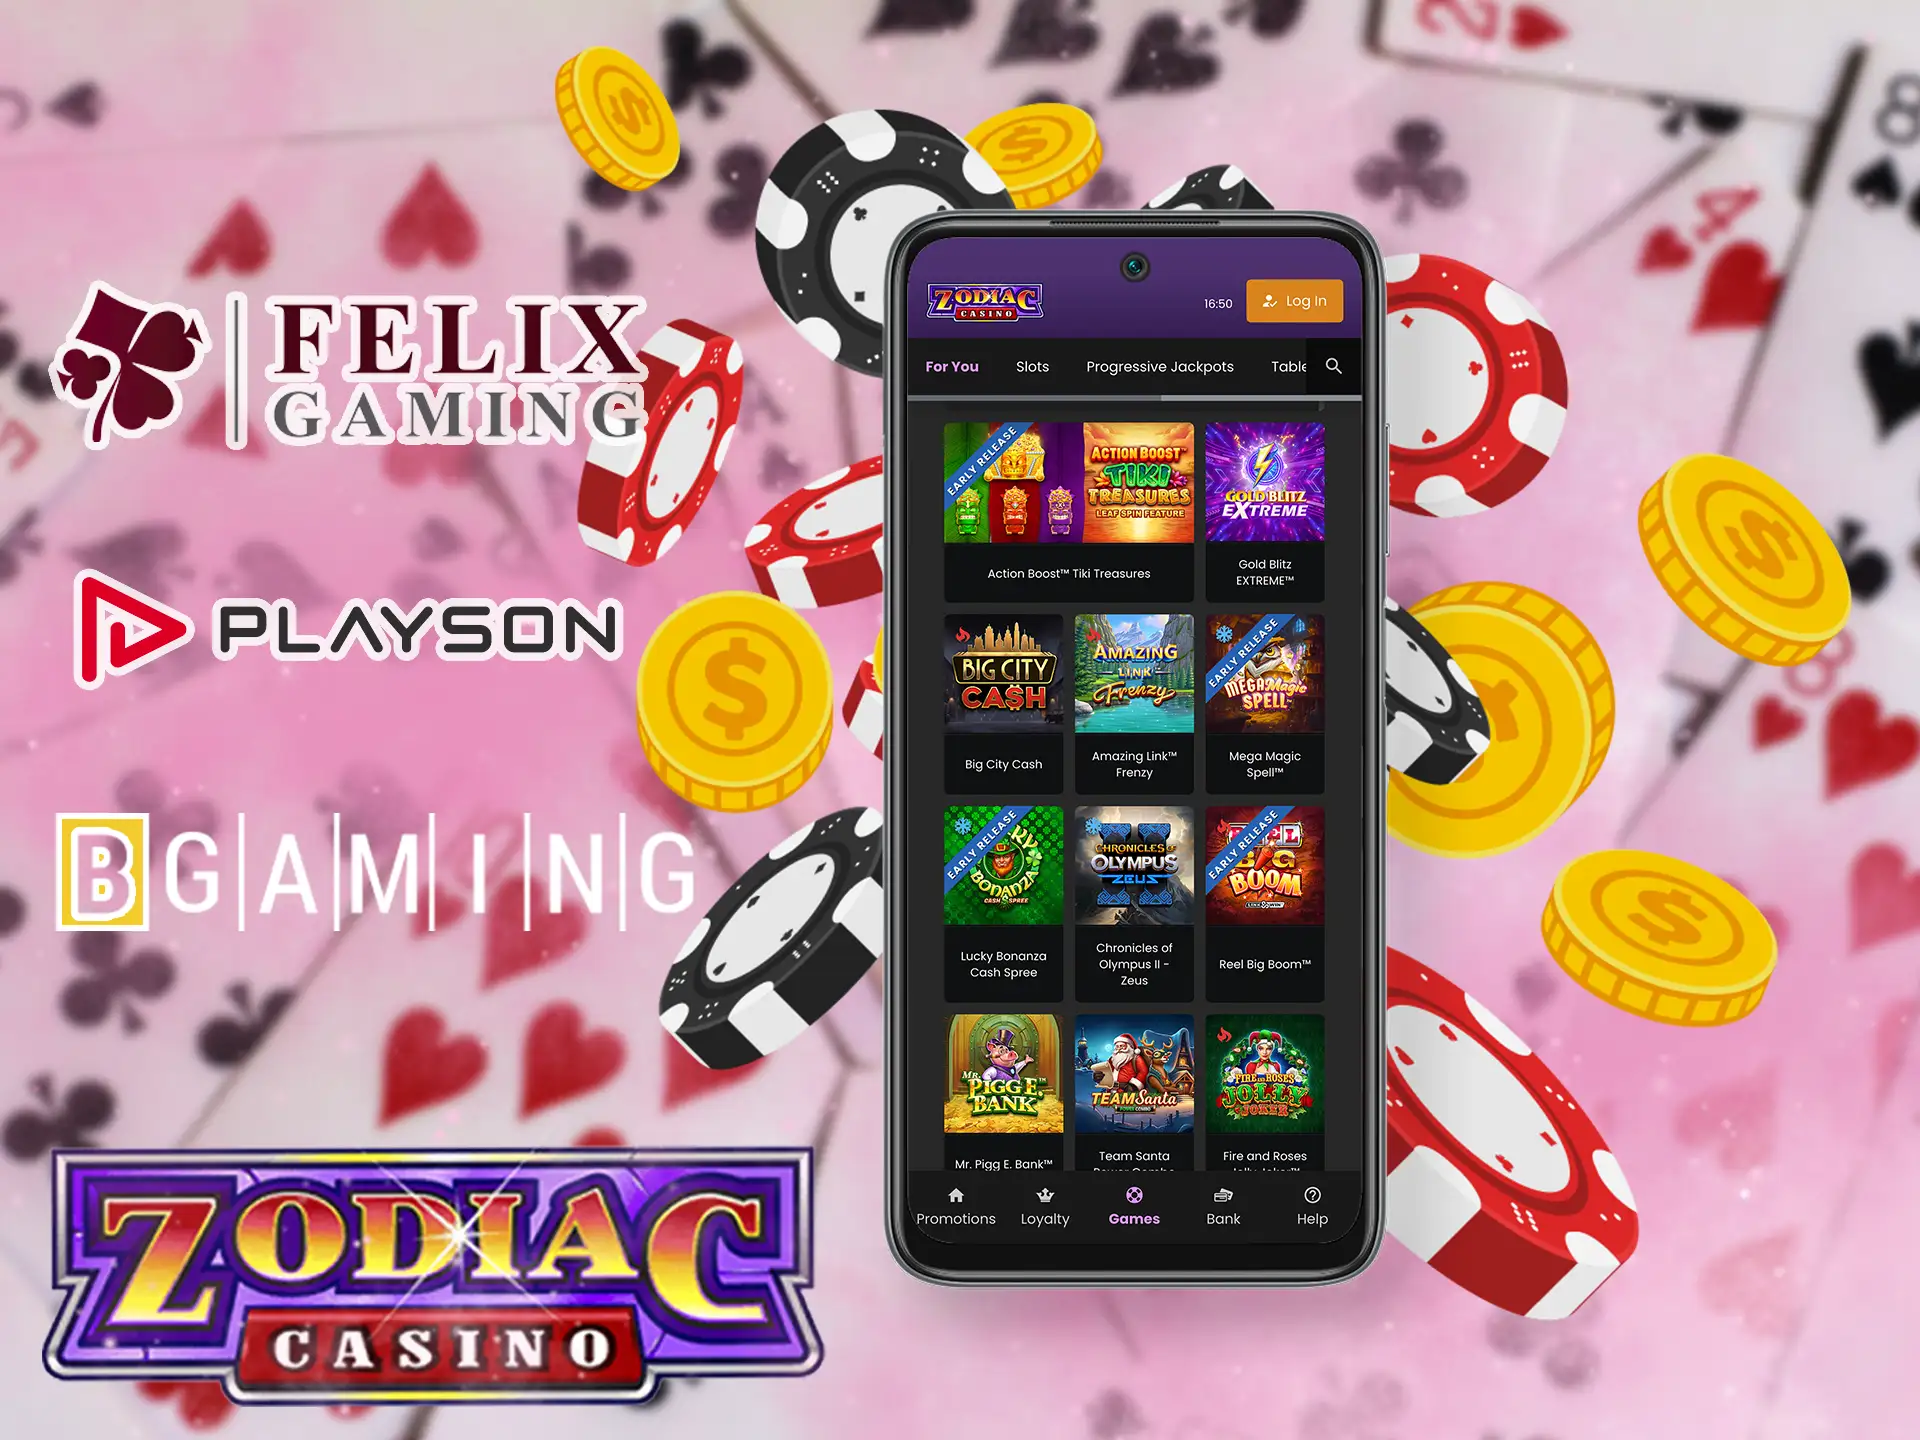 Only cool game developers are waiting for you, you will only get a pleasant experience from the casino platform Zodiac Casino.